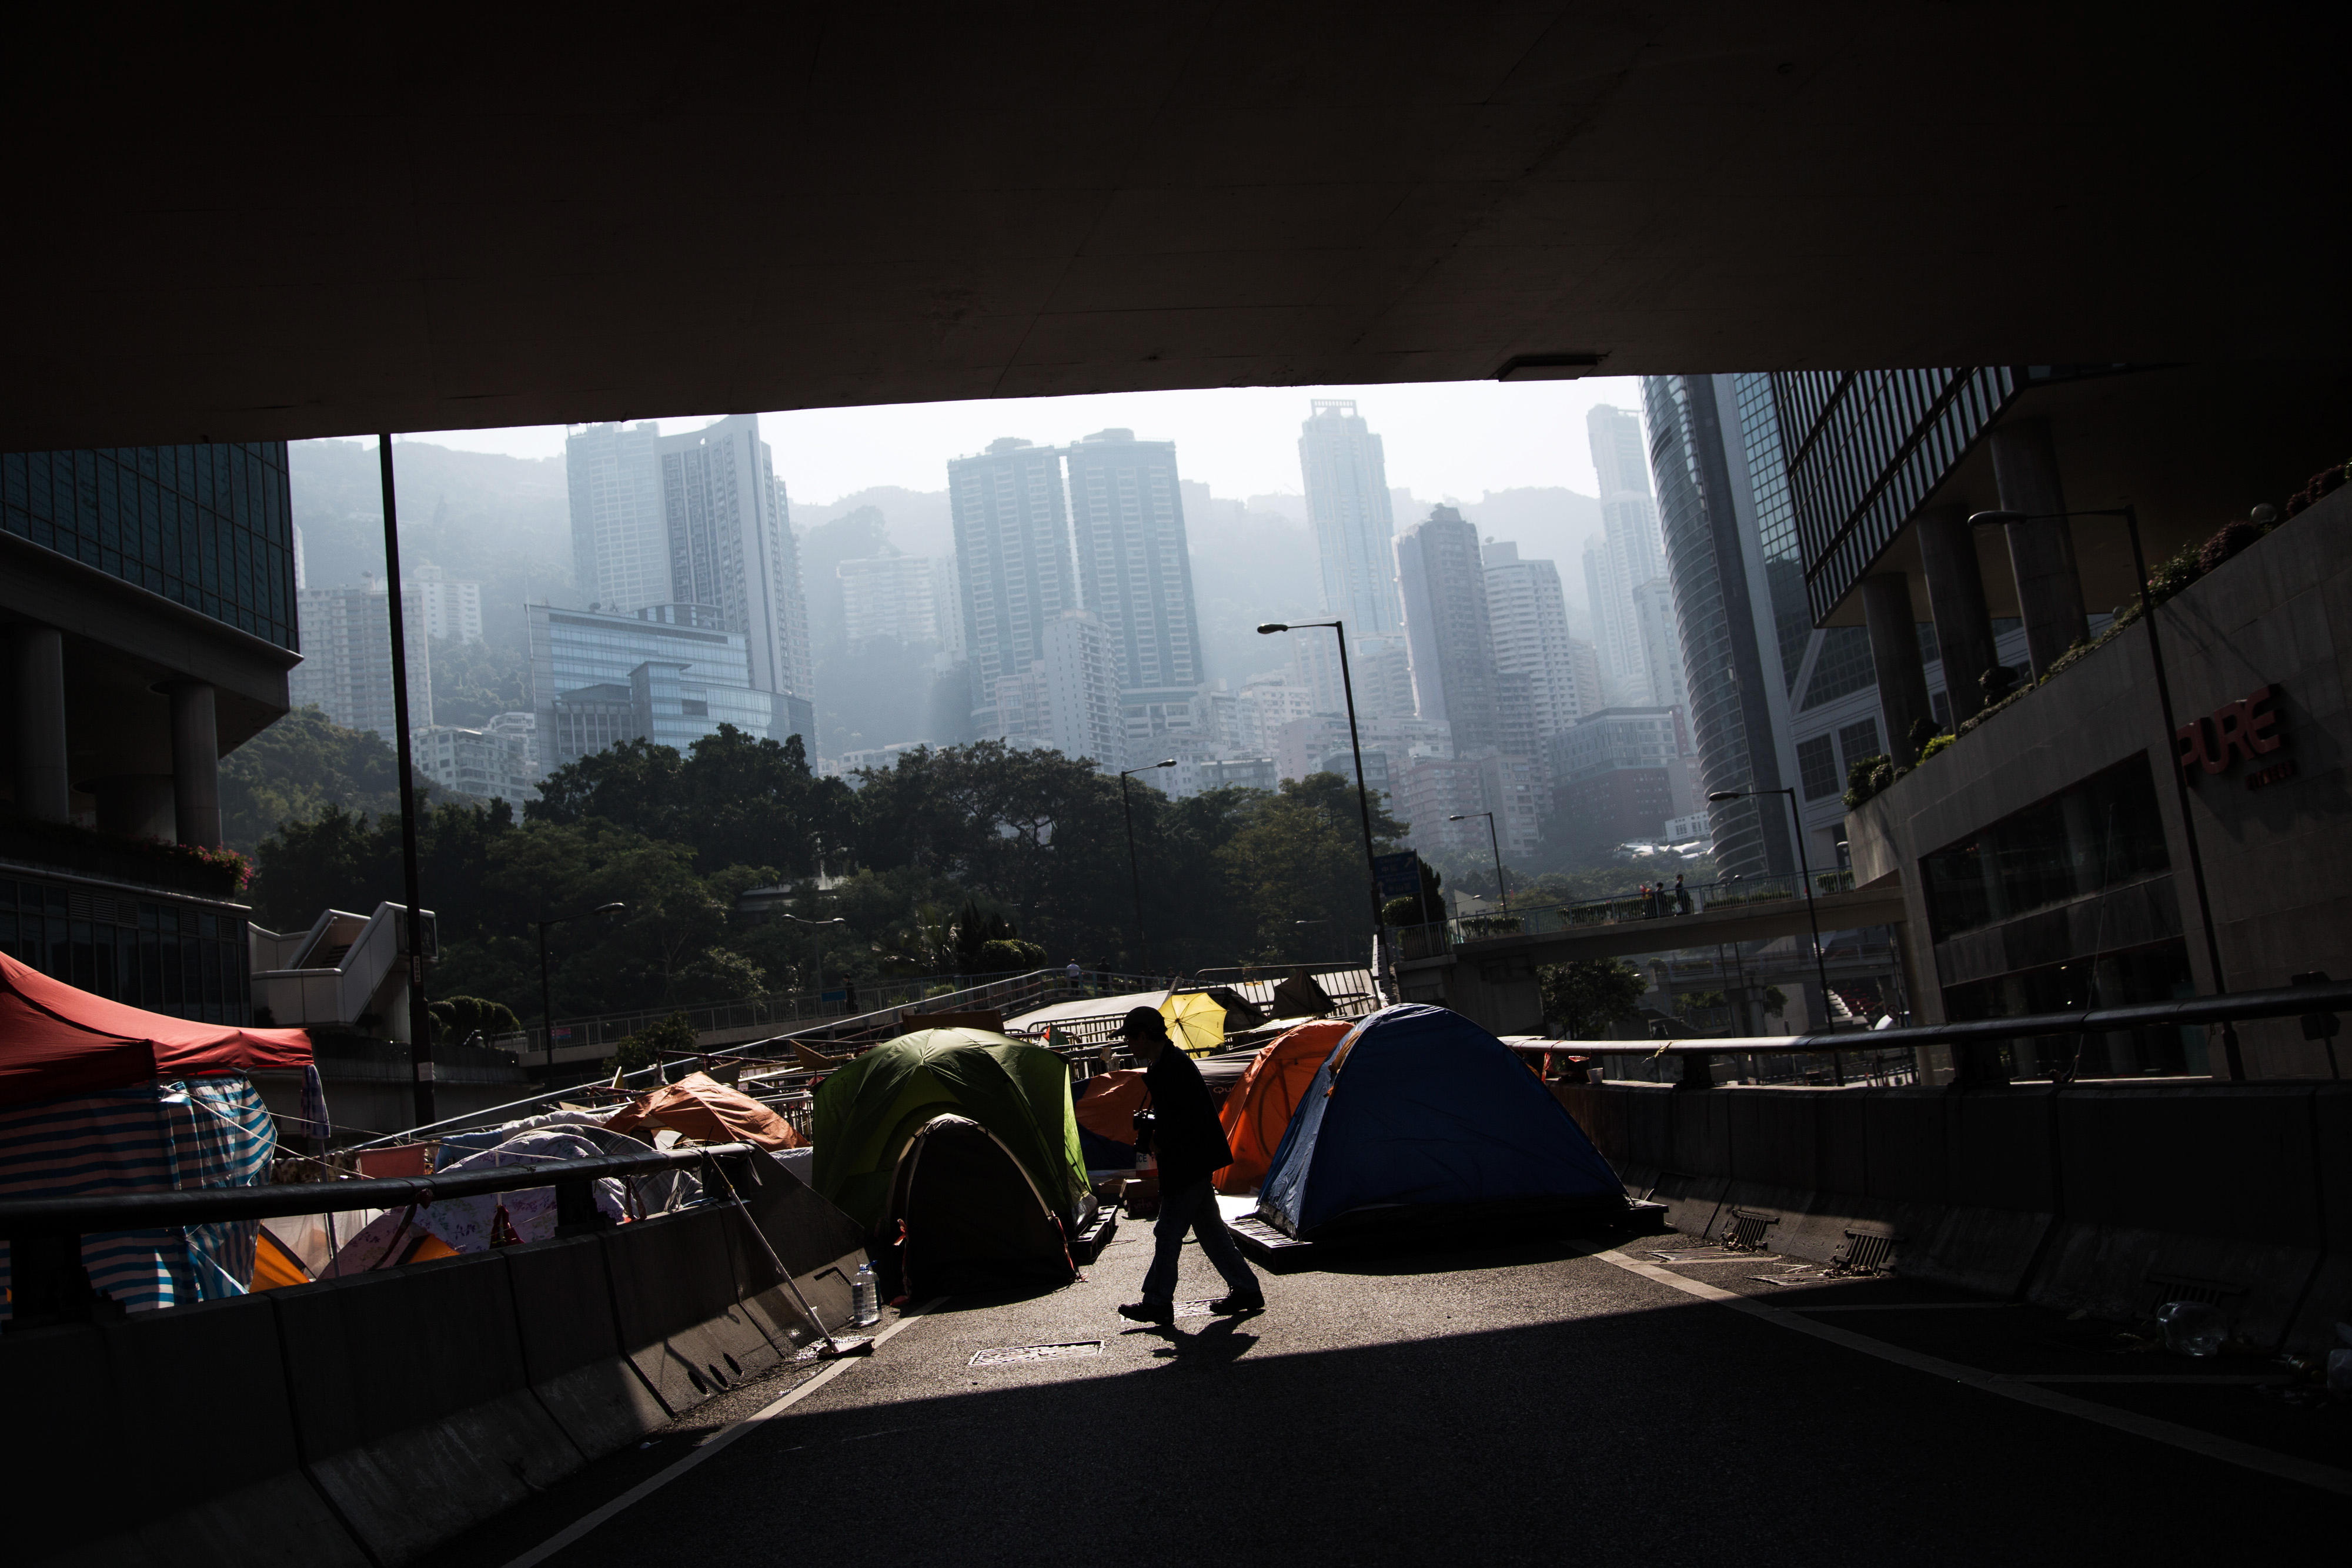 A man is silhouetted walking past tents on a flyover in the Admiralty district of Hong Kong on Dec. 9, 2014. Pro-democracy demonstrators in Hong Kong are bracing for police to clear part of their main protest site in two days following a court order to reopen roads that have been occupied for more than two months (Bloomberg/Getty Images)